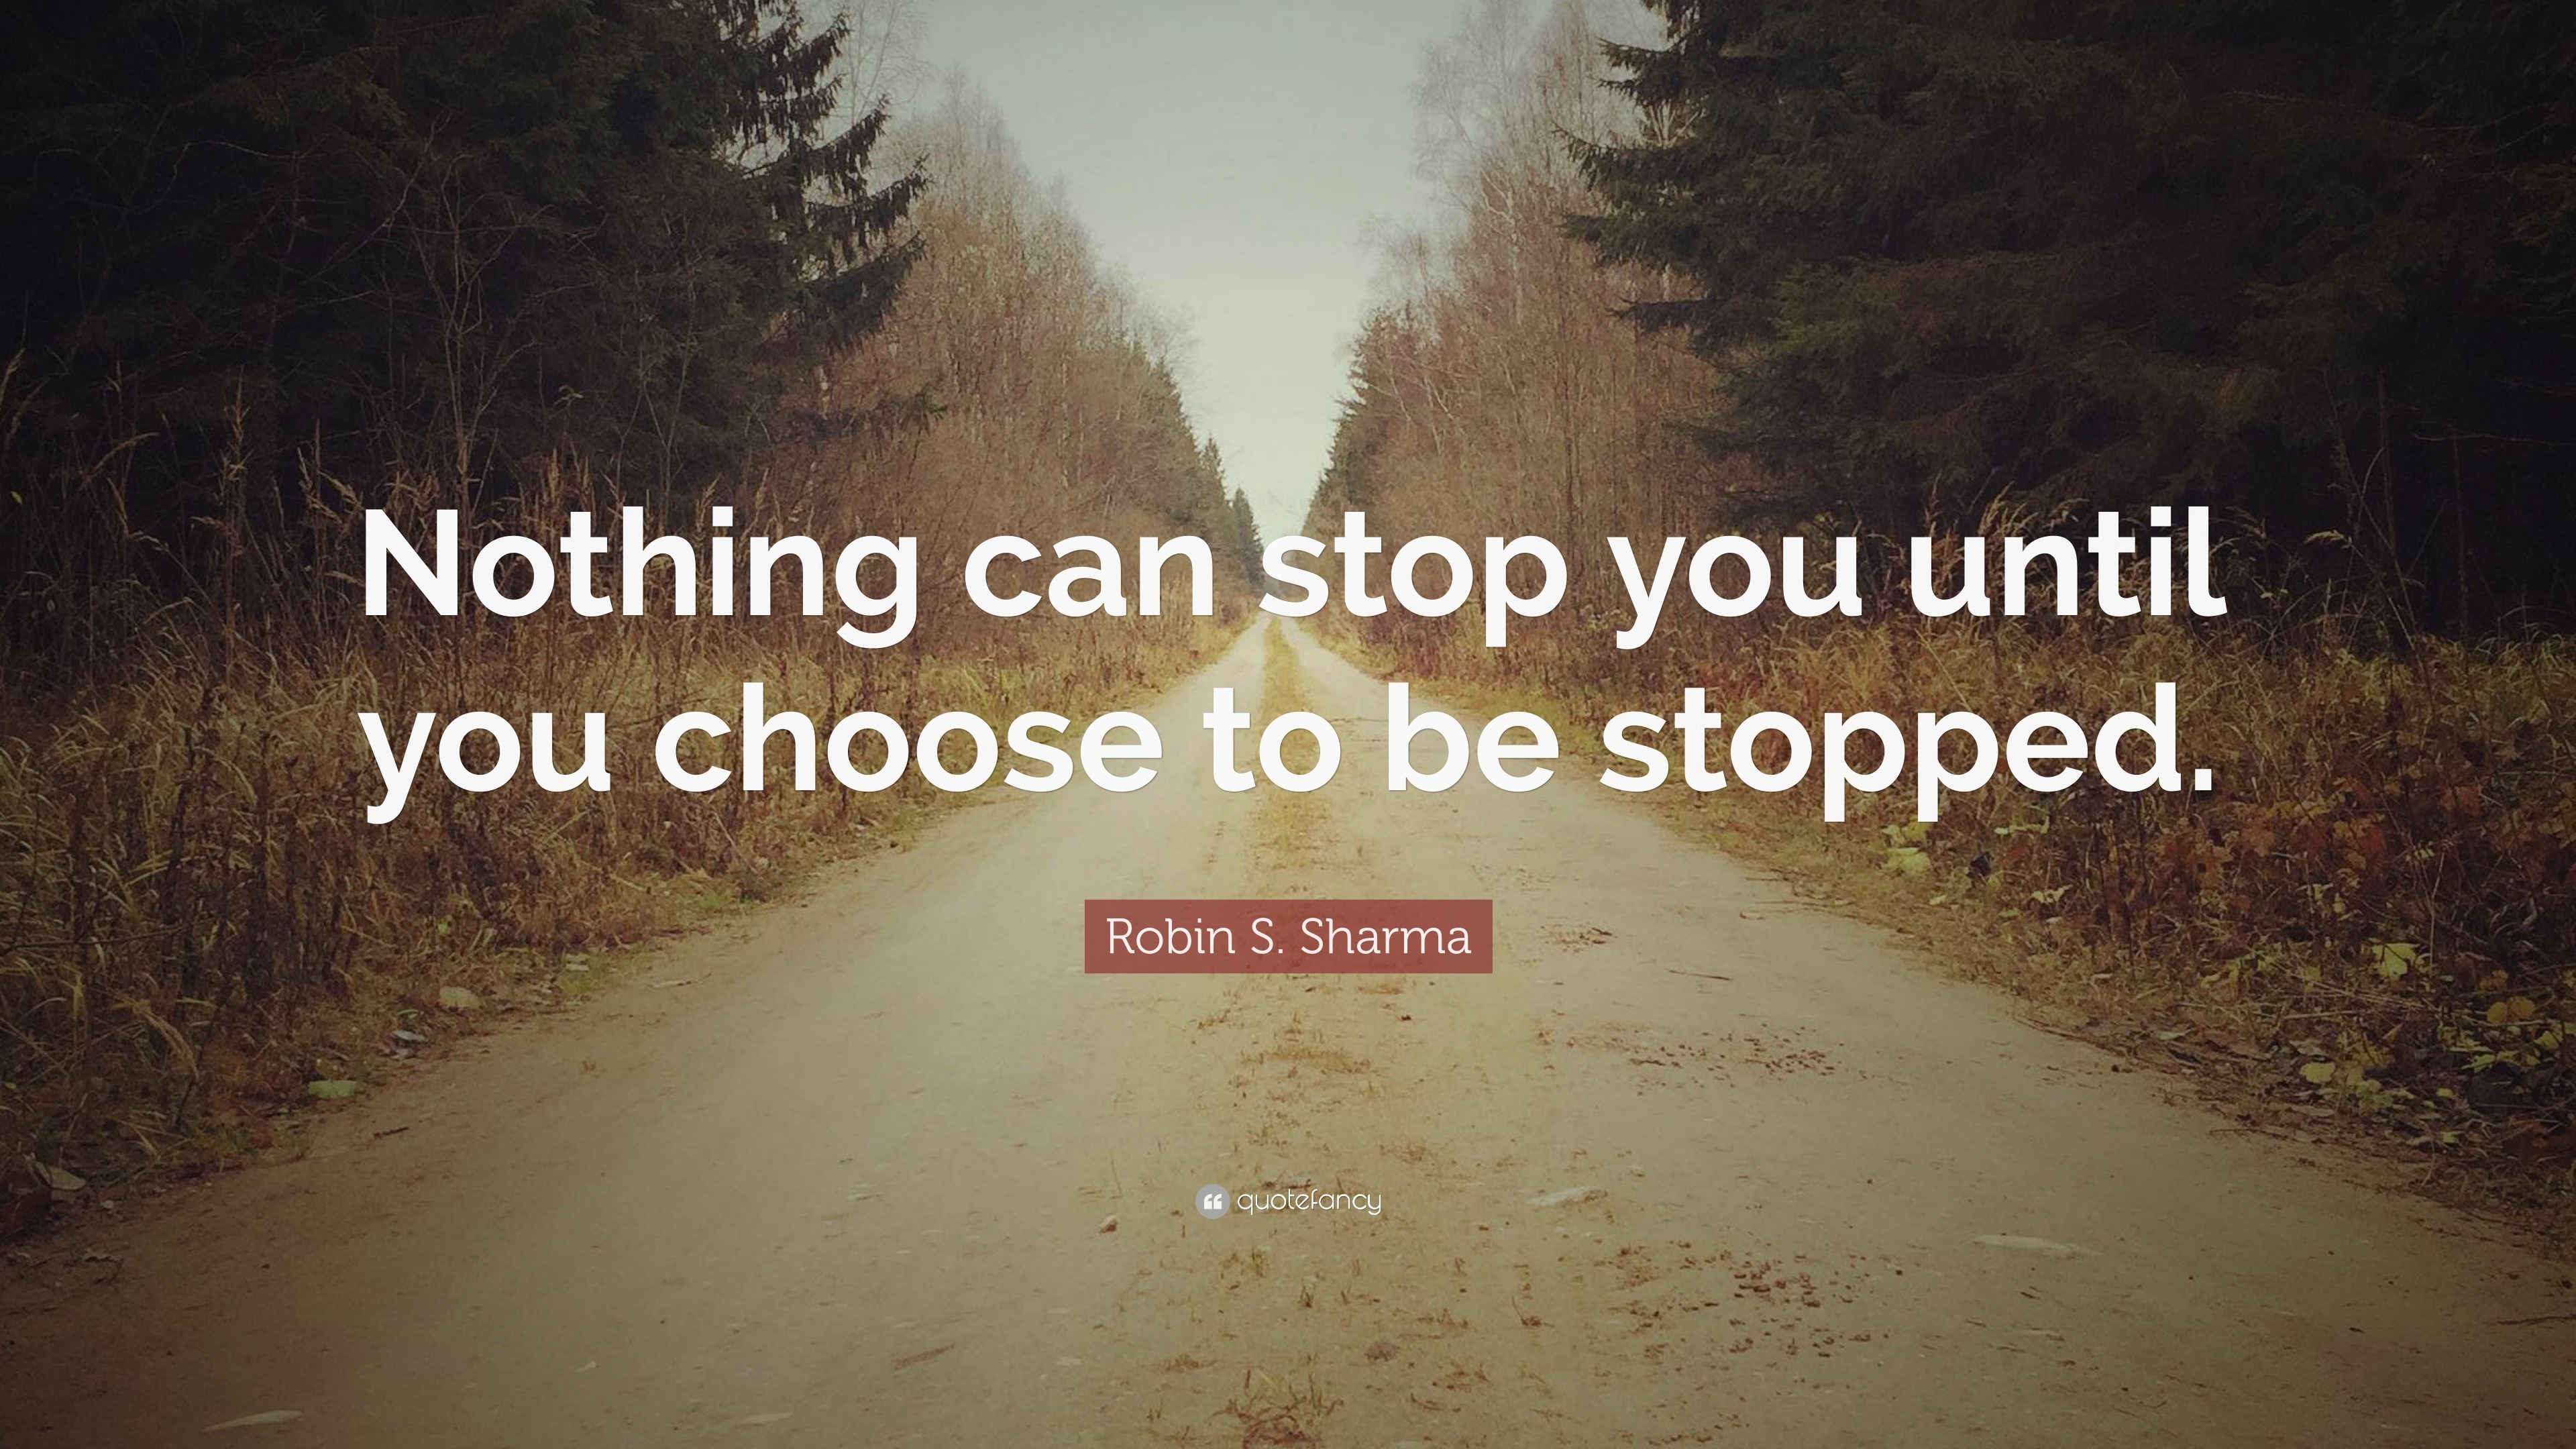 Robin S. Sharma Quote: “Nothing Can Stop You Until You Choose To Be Stopped .”